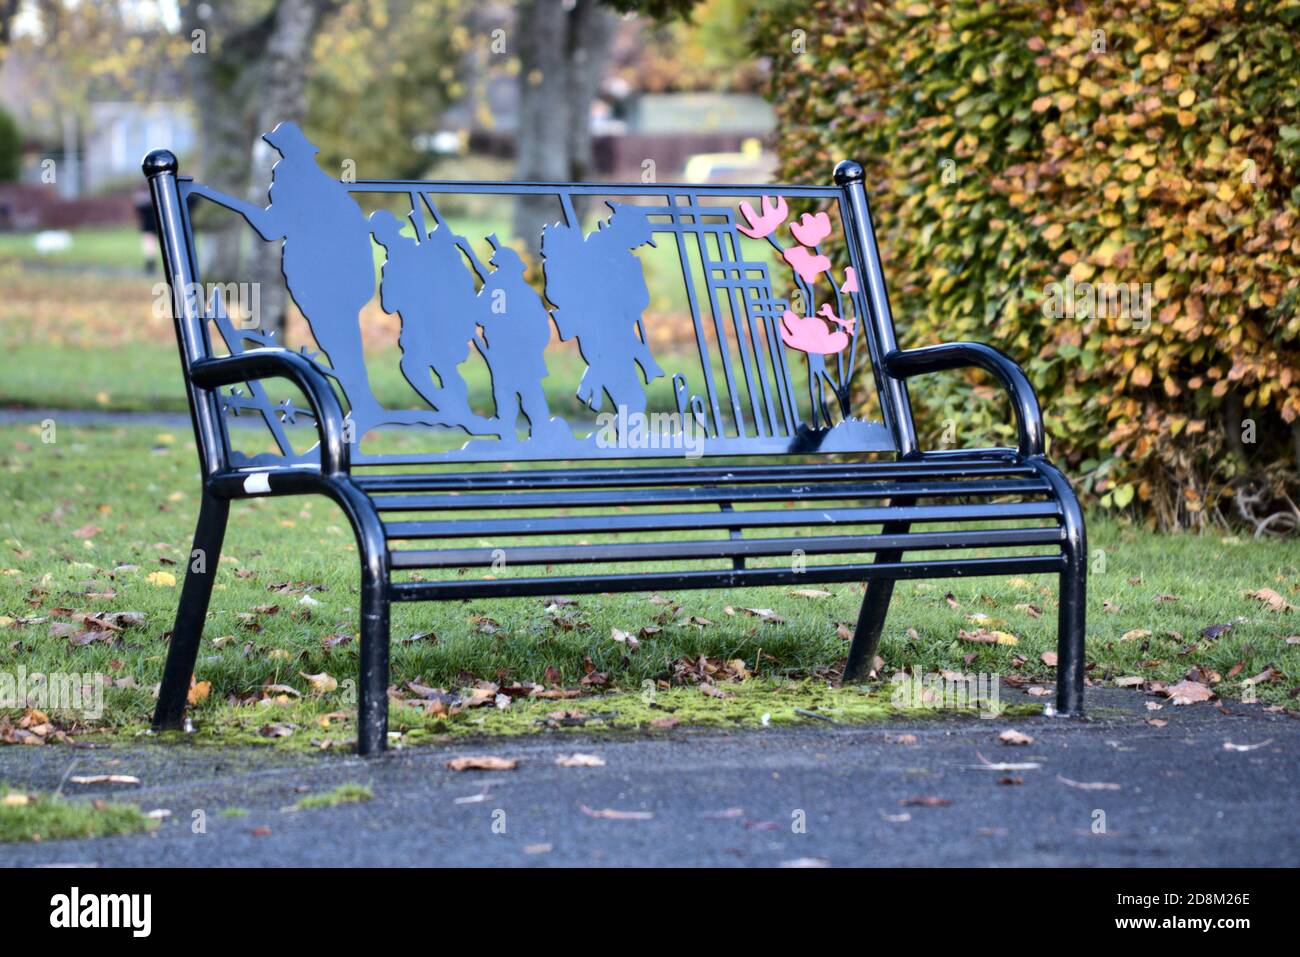 Remembrance bench for armed forces Stock Photo